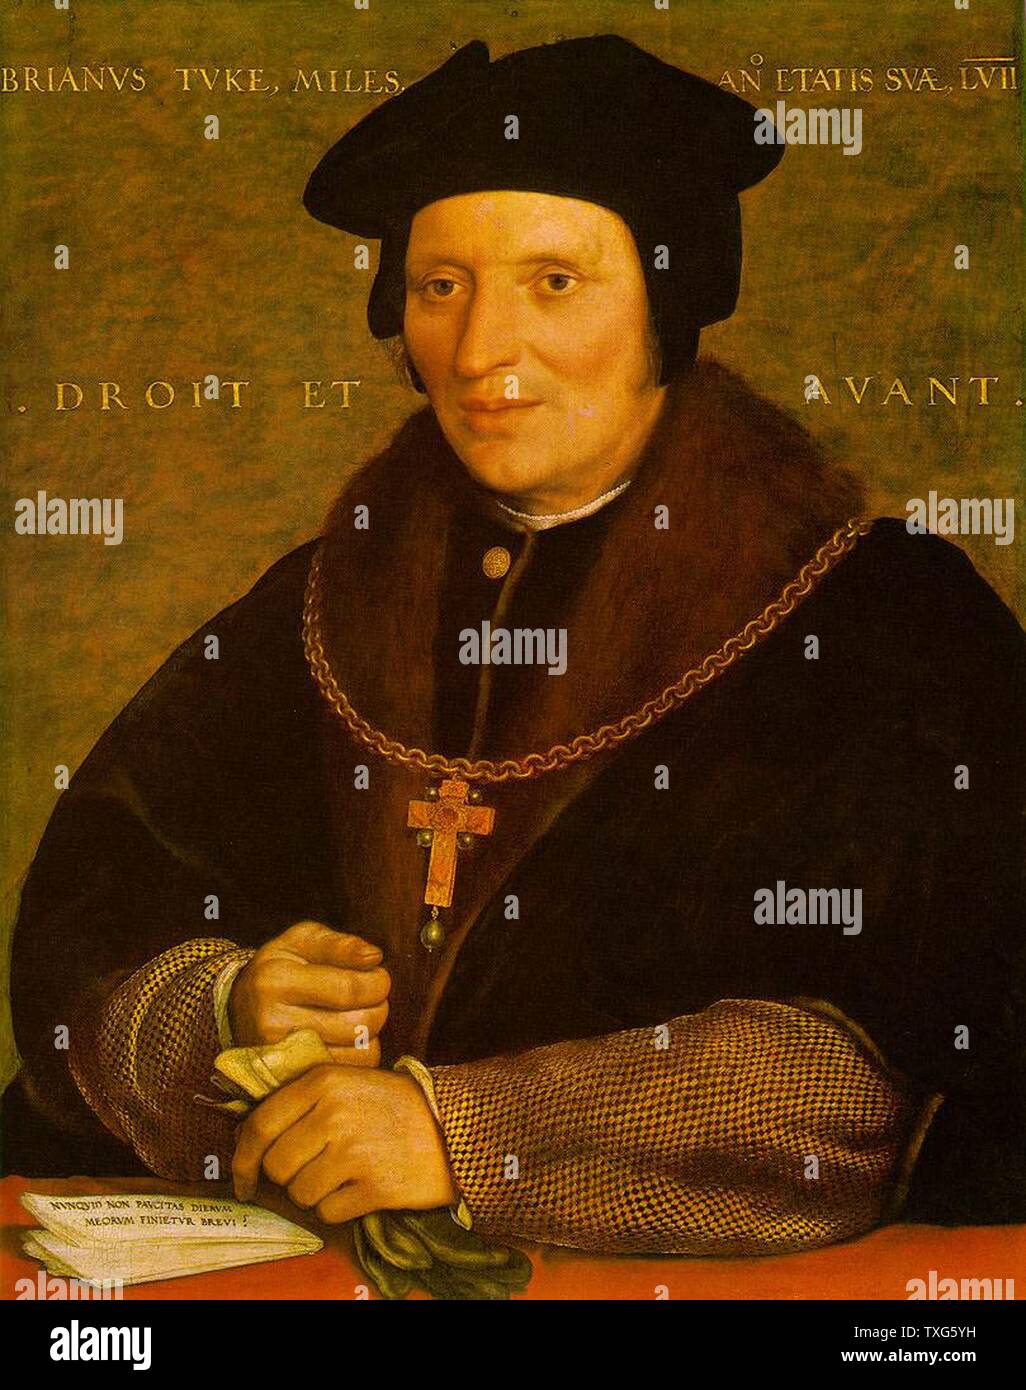 Hans Holbein the Younger  Portrait of Sir Brian Tuke, Treasurer and secretary to Henry VIII of England Oil on panel Stock Photo